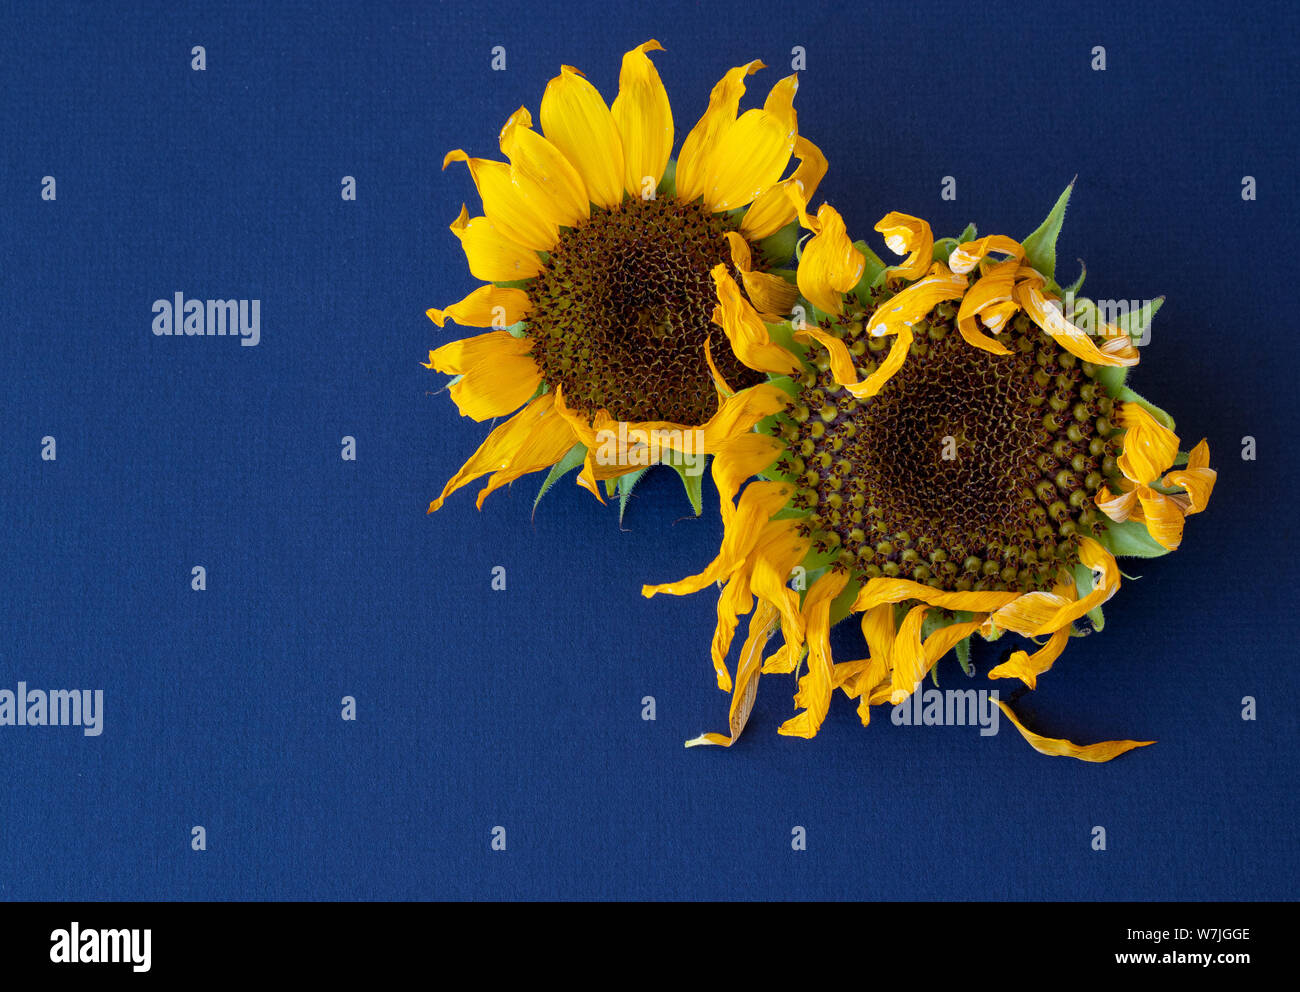 Two sunflowers at the end of their blooming cycle. Stock Photo